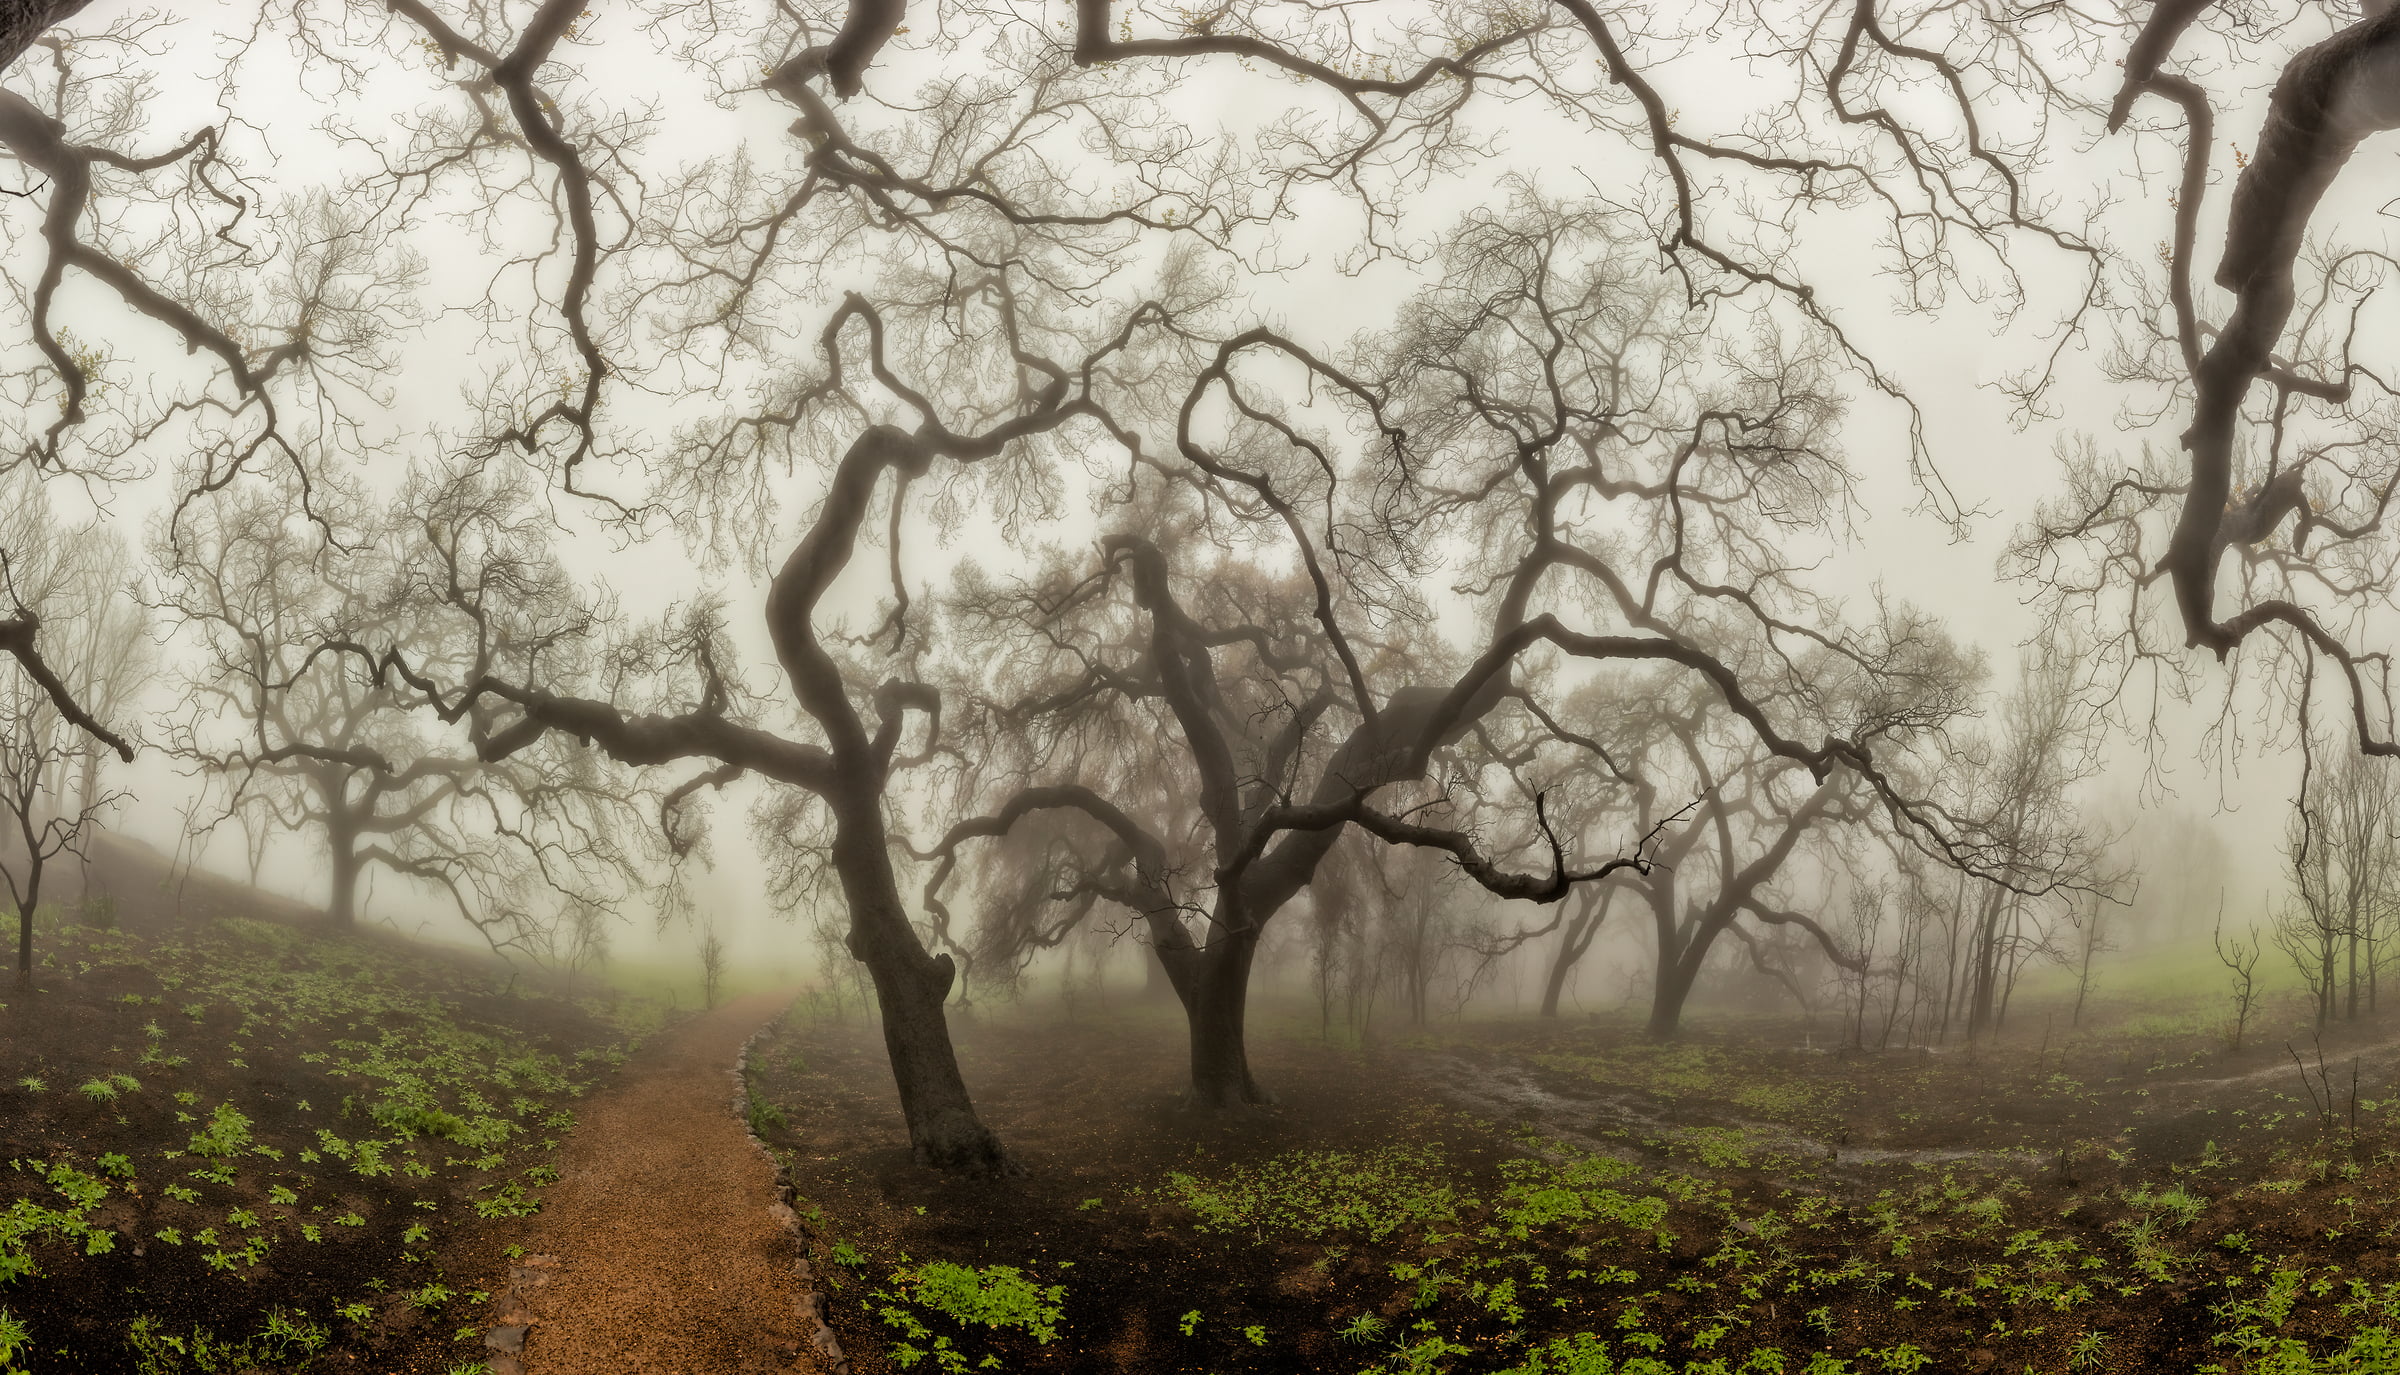 512 megapixels! A very high resolution, large-format VAST photo print of a creepy forest; photograph created by Peter Rodger in Nicolas Ridge, Malibu, California